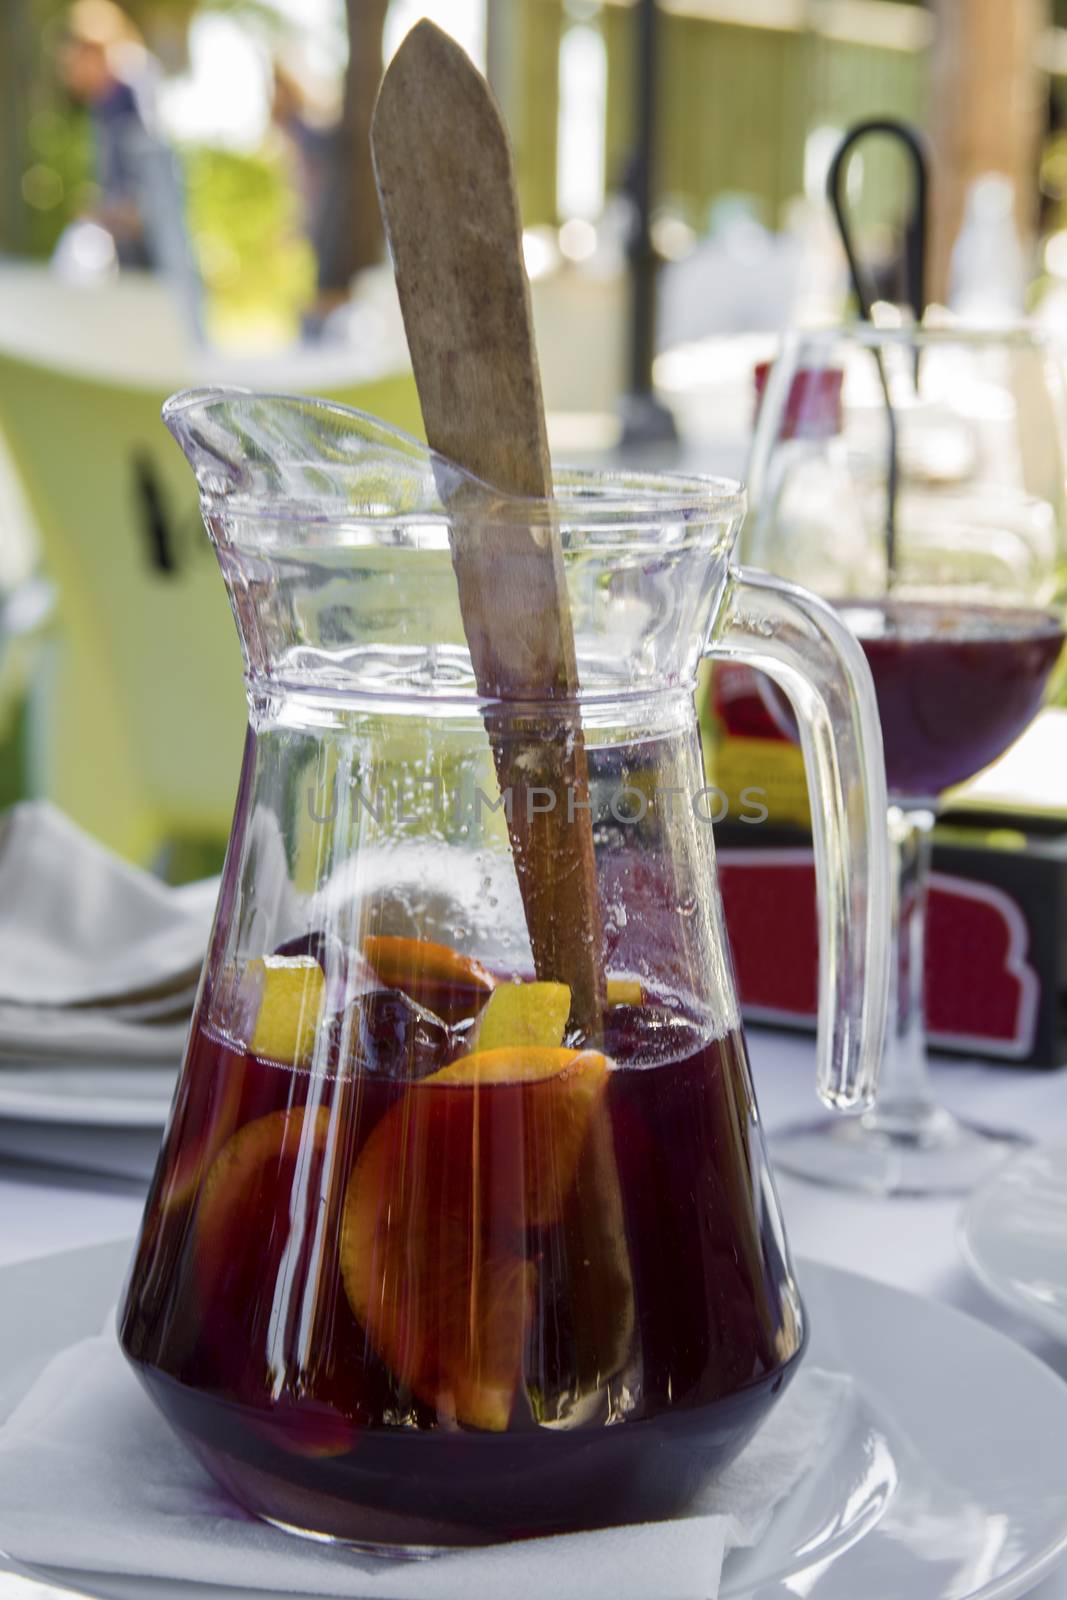 Jug of sangria on a white table. Glass goblets. Concept of relaxation and enjoyment of life by Anelik